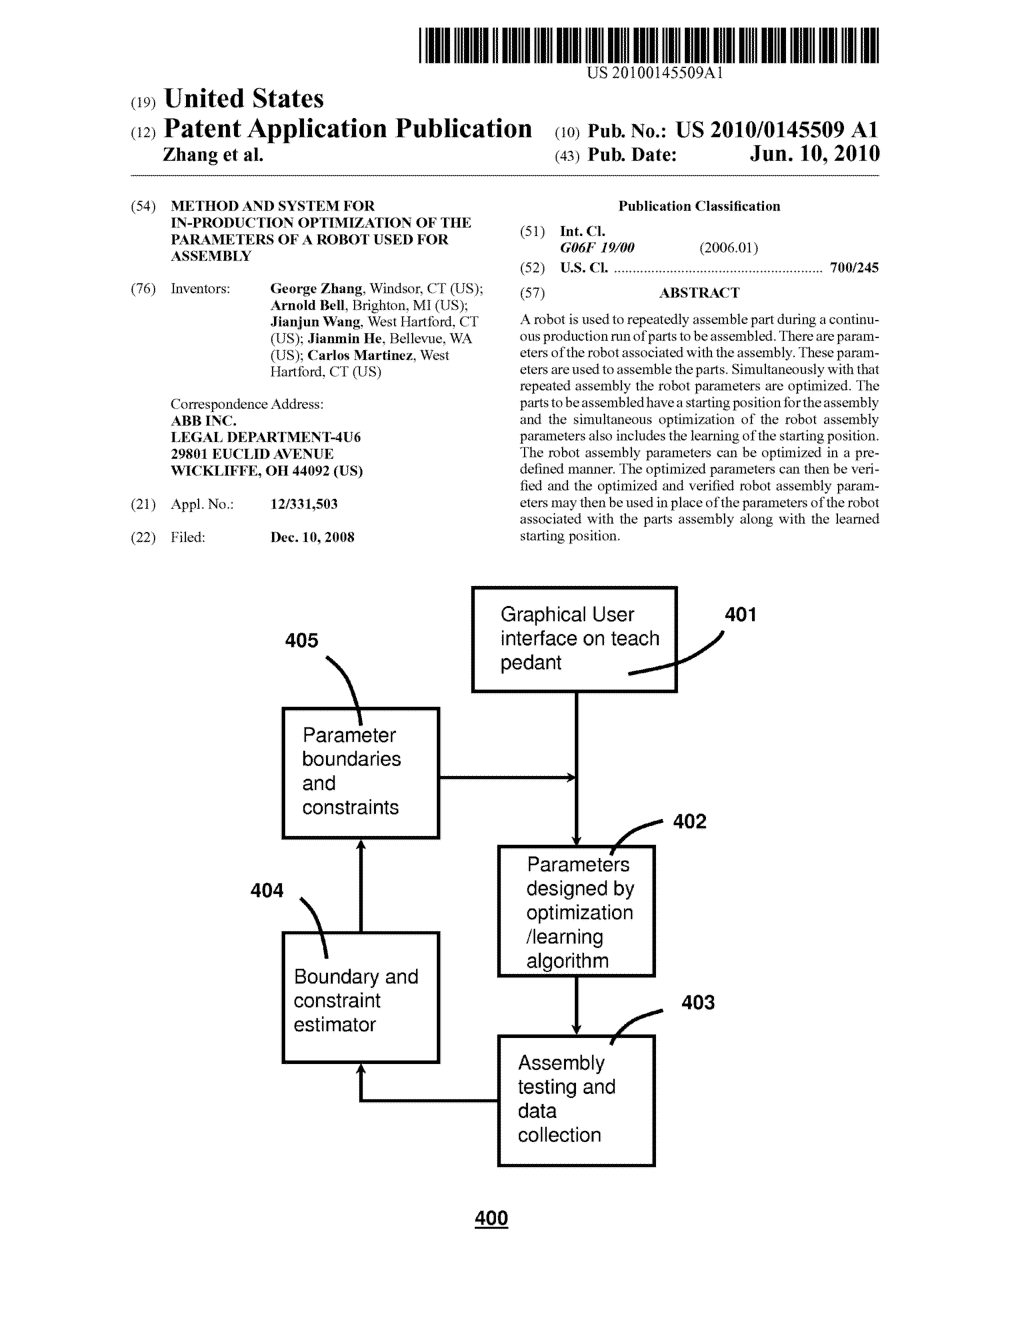 Method And System For In-Production Optimization of The Parameters Of A Robot Used for Assembly - diagram, schematic, and image 01